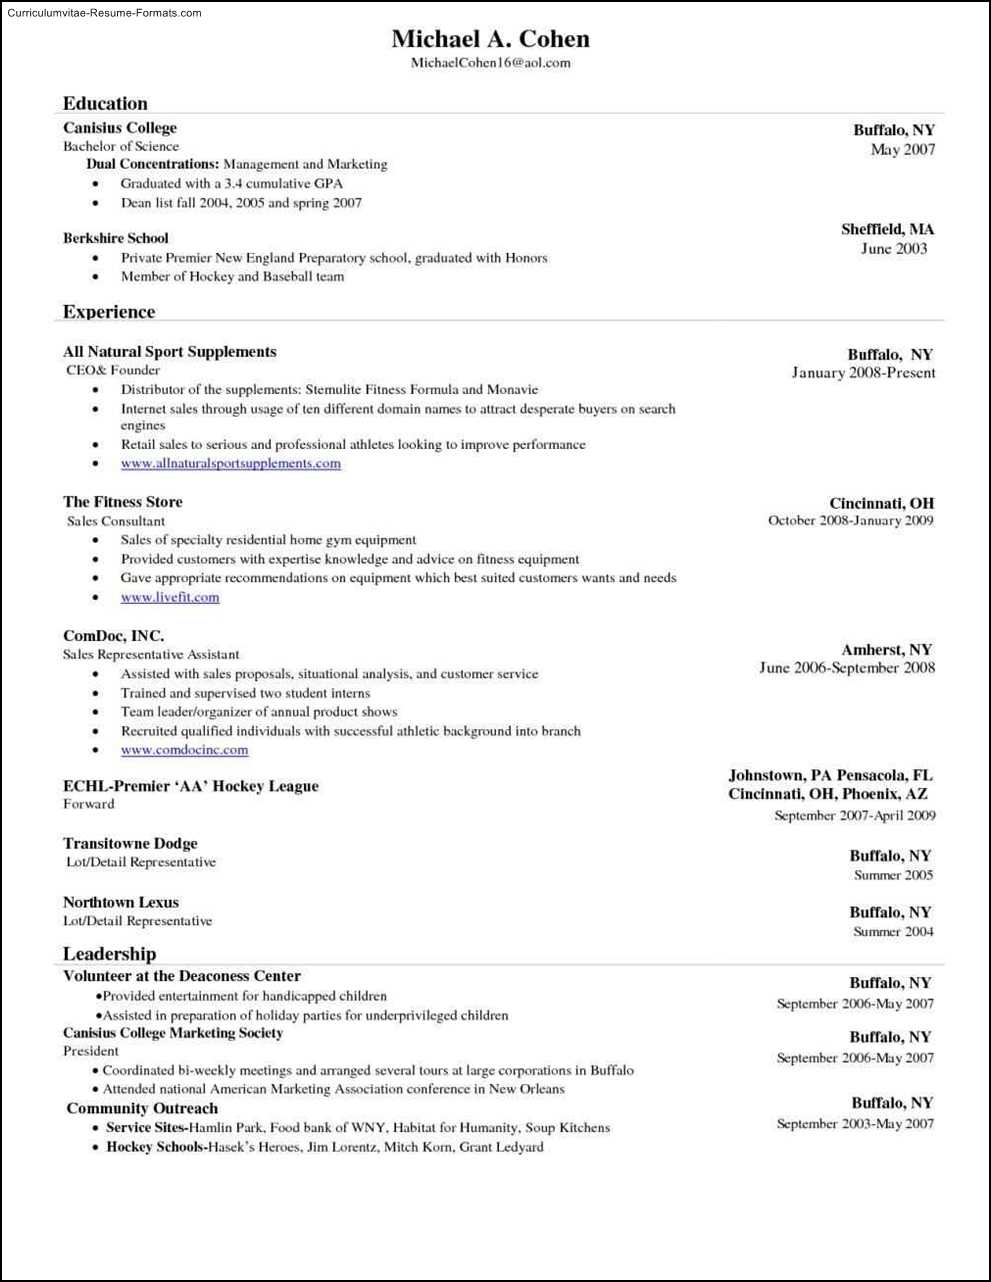 Resume Wizard In Ms Word | Professional Resumes Sample Online With Resume Templates Microsoft Word 2010